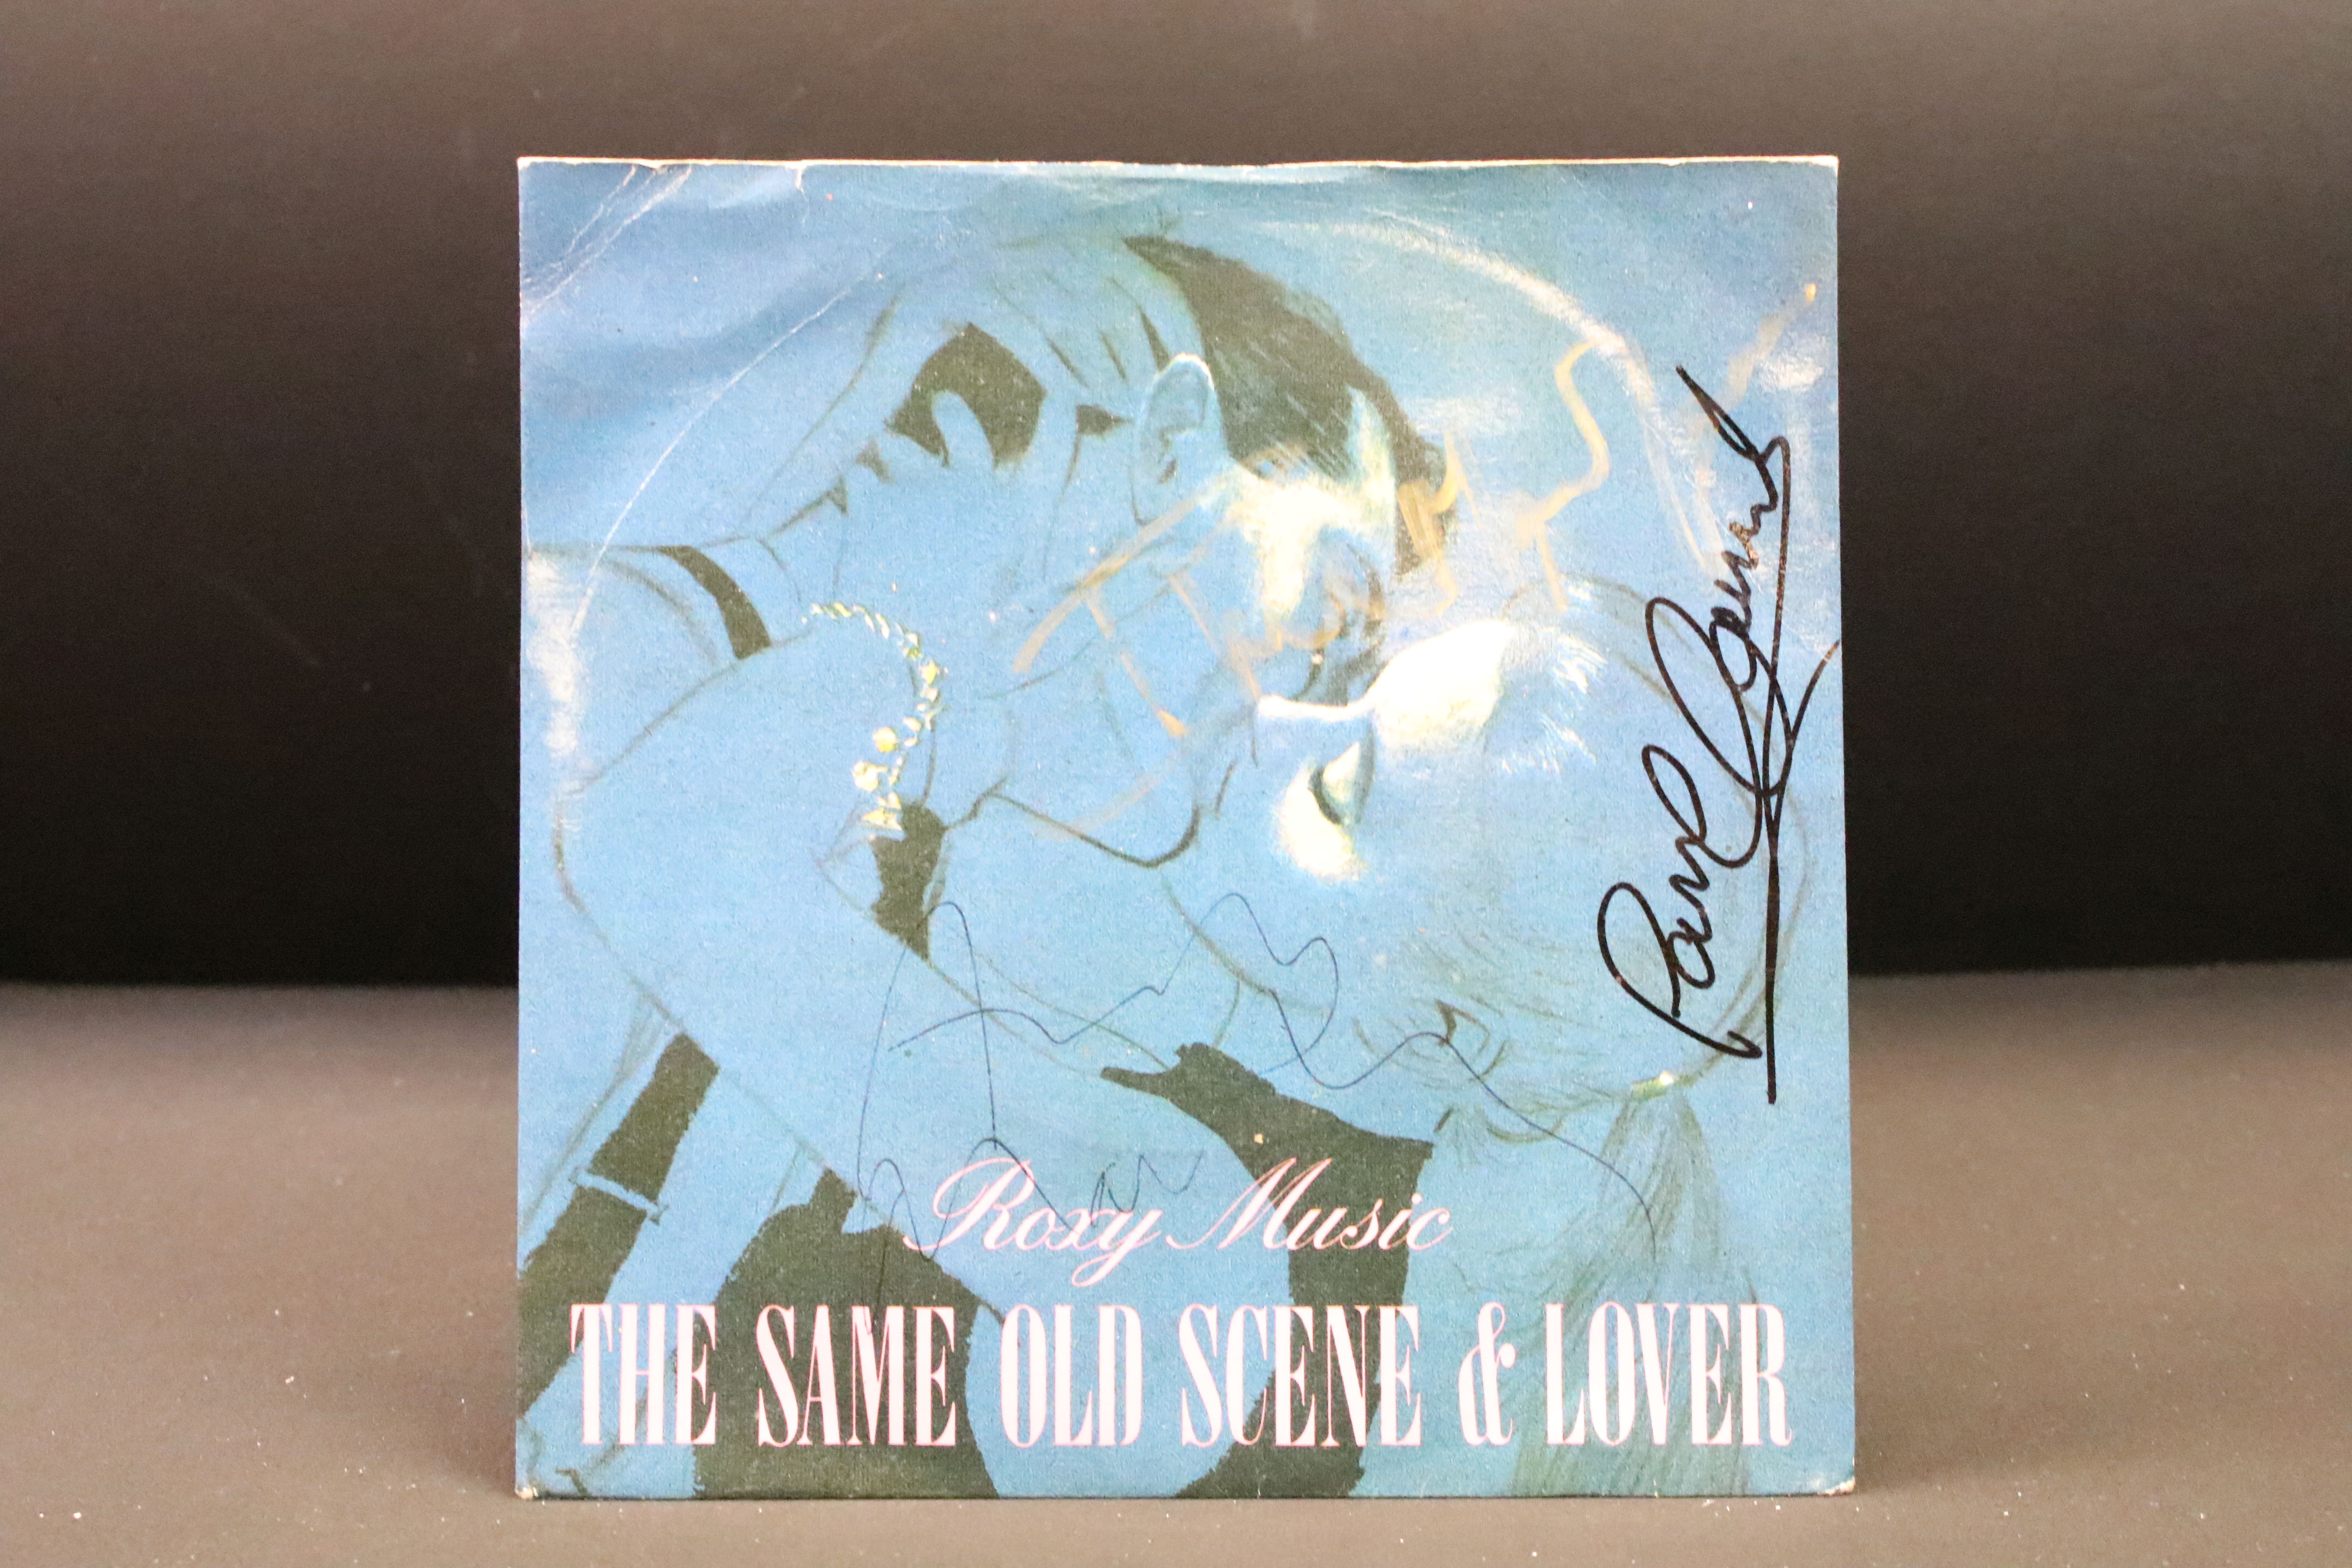 Vinyl / Autographs - 5 Roxy Music 7” singles signed by 2 or more members to include: Angel Eyes ( - Image 6 of 6